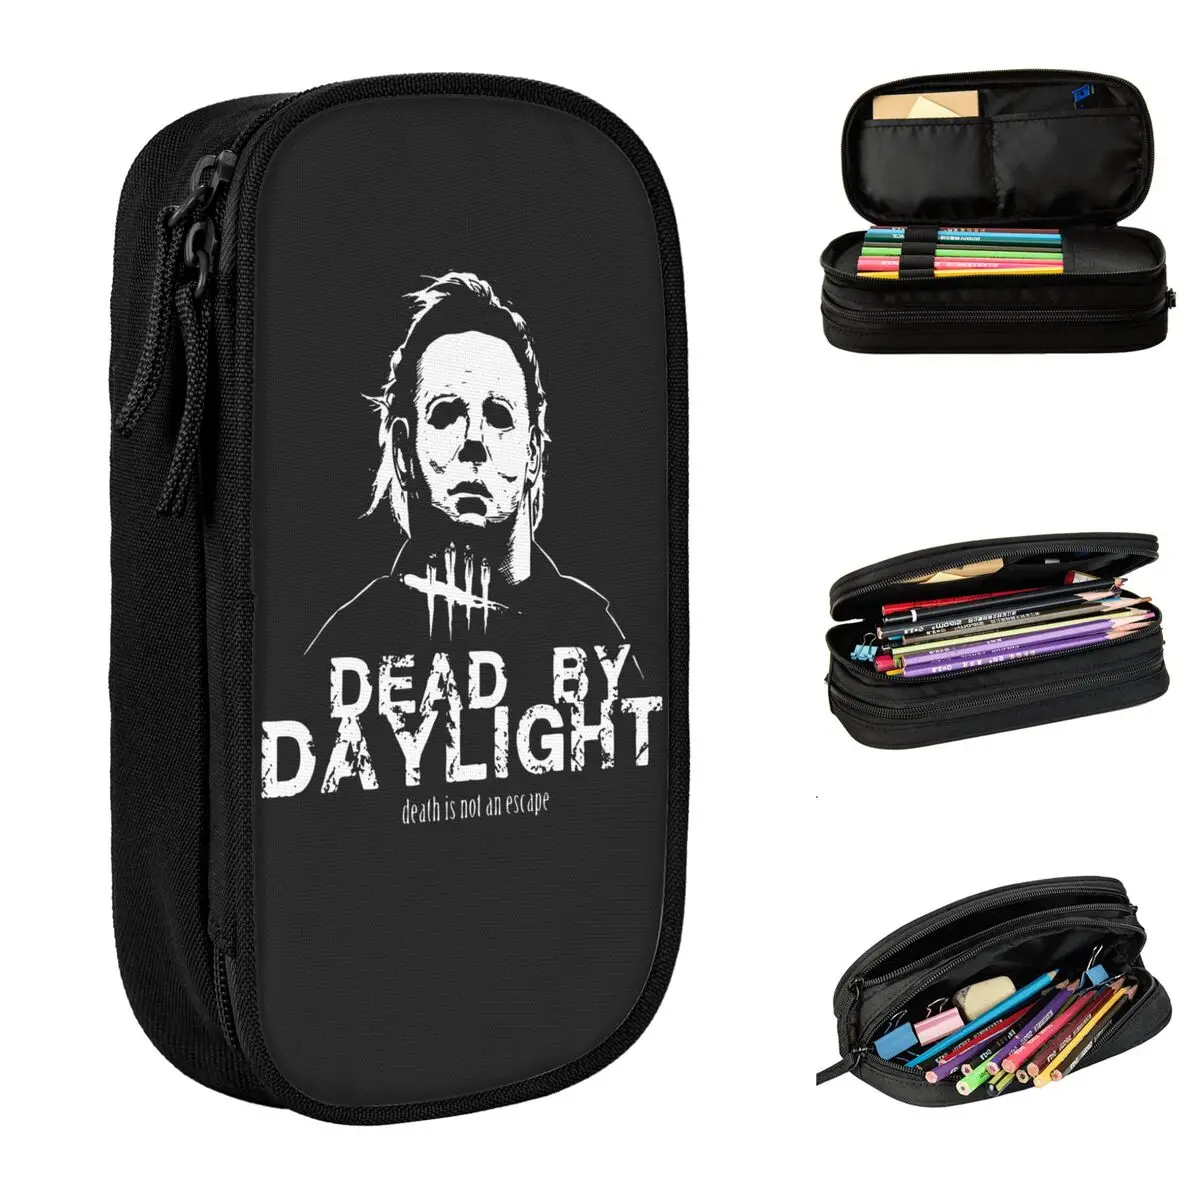 Michael Myers Pencil Case Fun Horror The Videogame Dbd Trapper Killers Game Pen Box Bag School Supplies Gifts Pencilcases